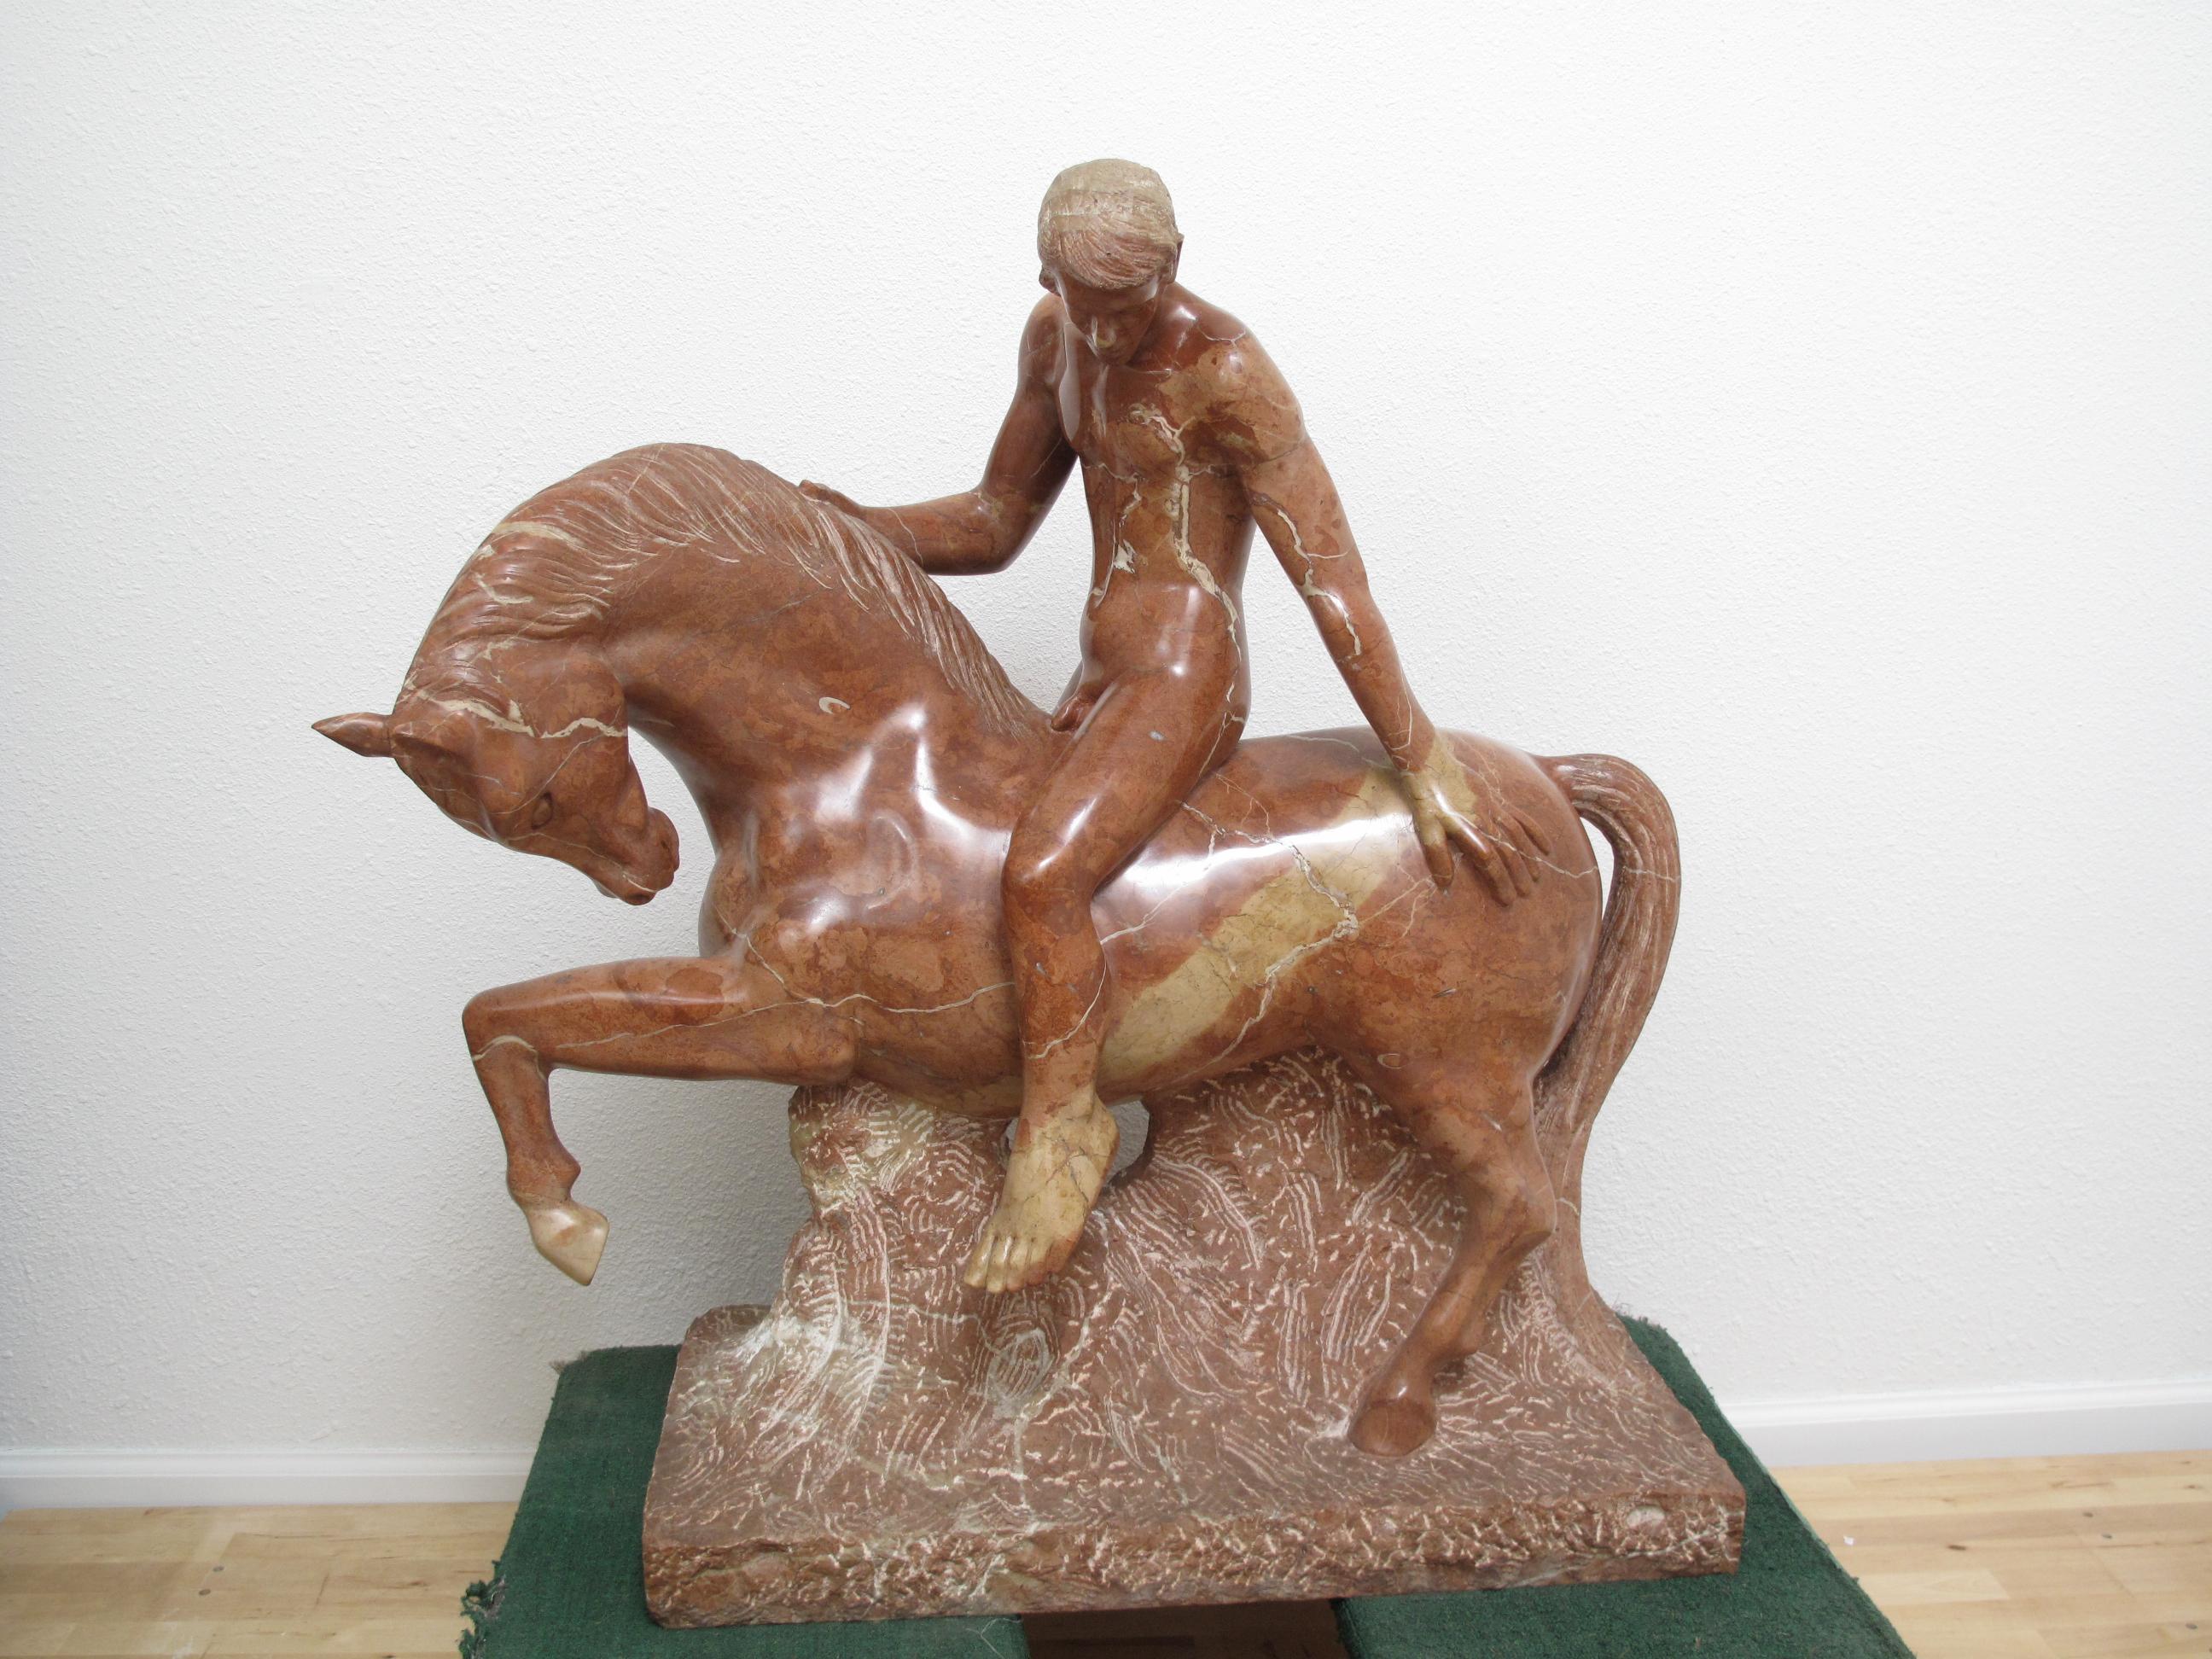 Rosso Alicante marble sculpture of Man Upon Horse by Luis Antonio Sanguino titled 